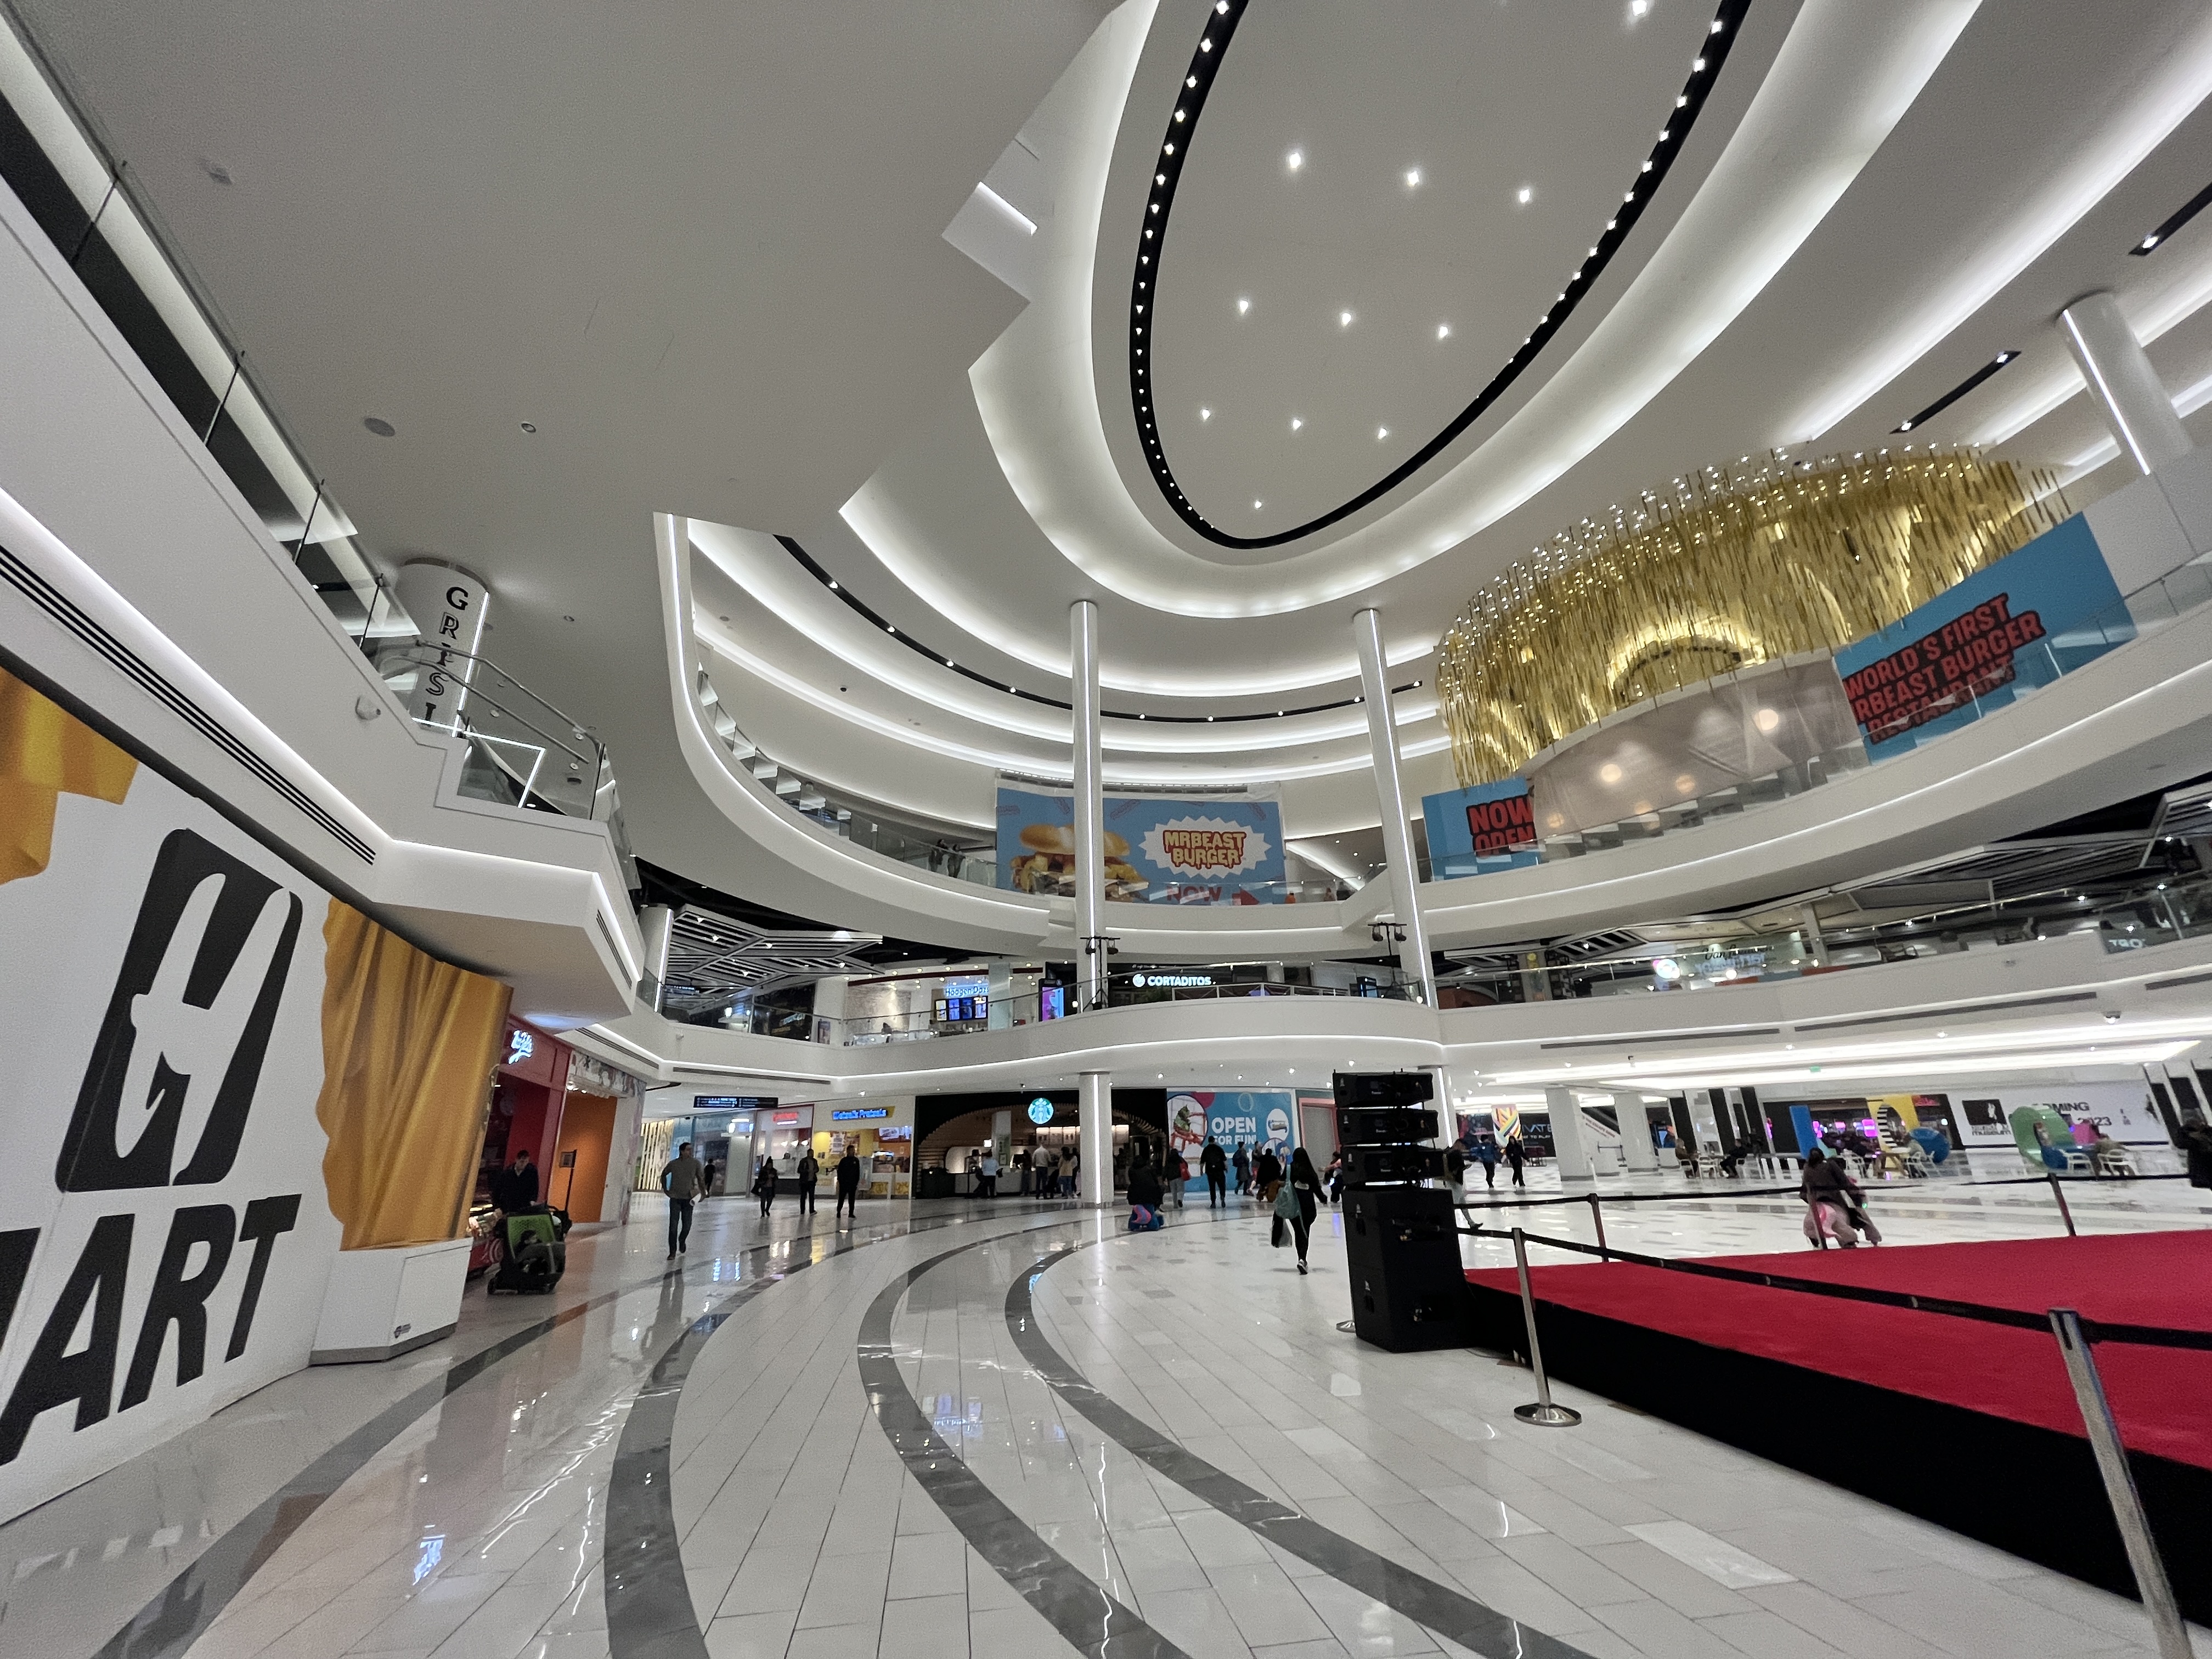 American Dream Mall Tour 2021 East Rutherford , New Jersey